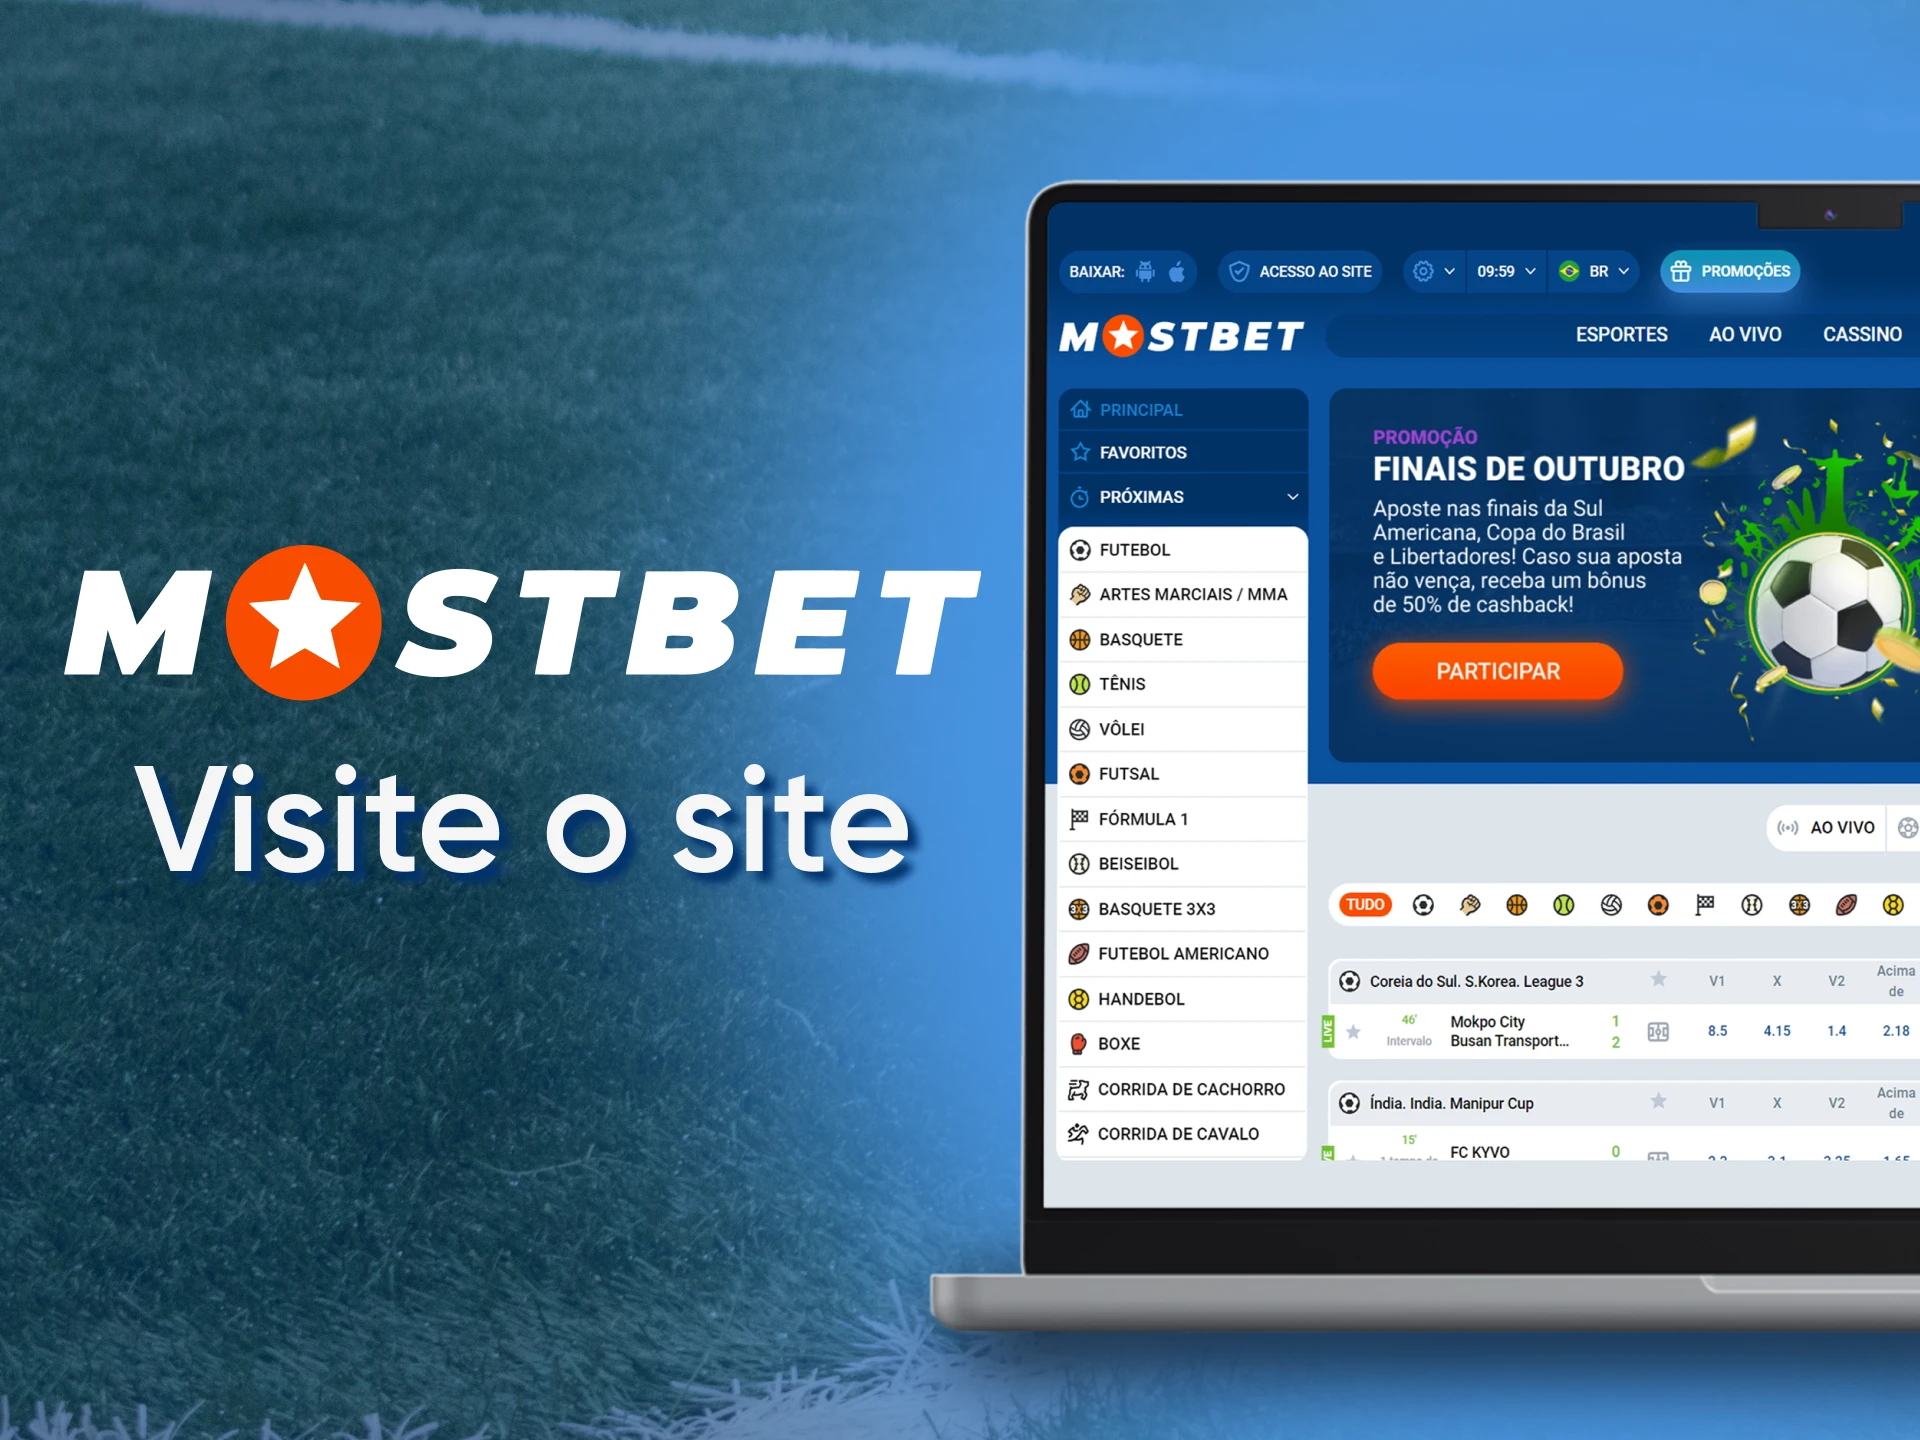 Go to the official website of Mostbet.